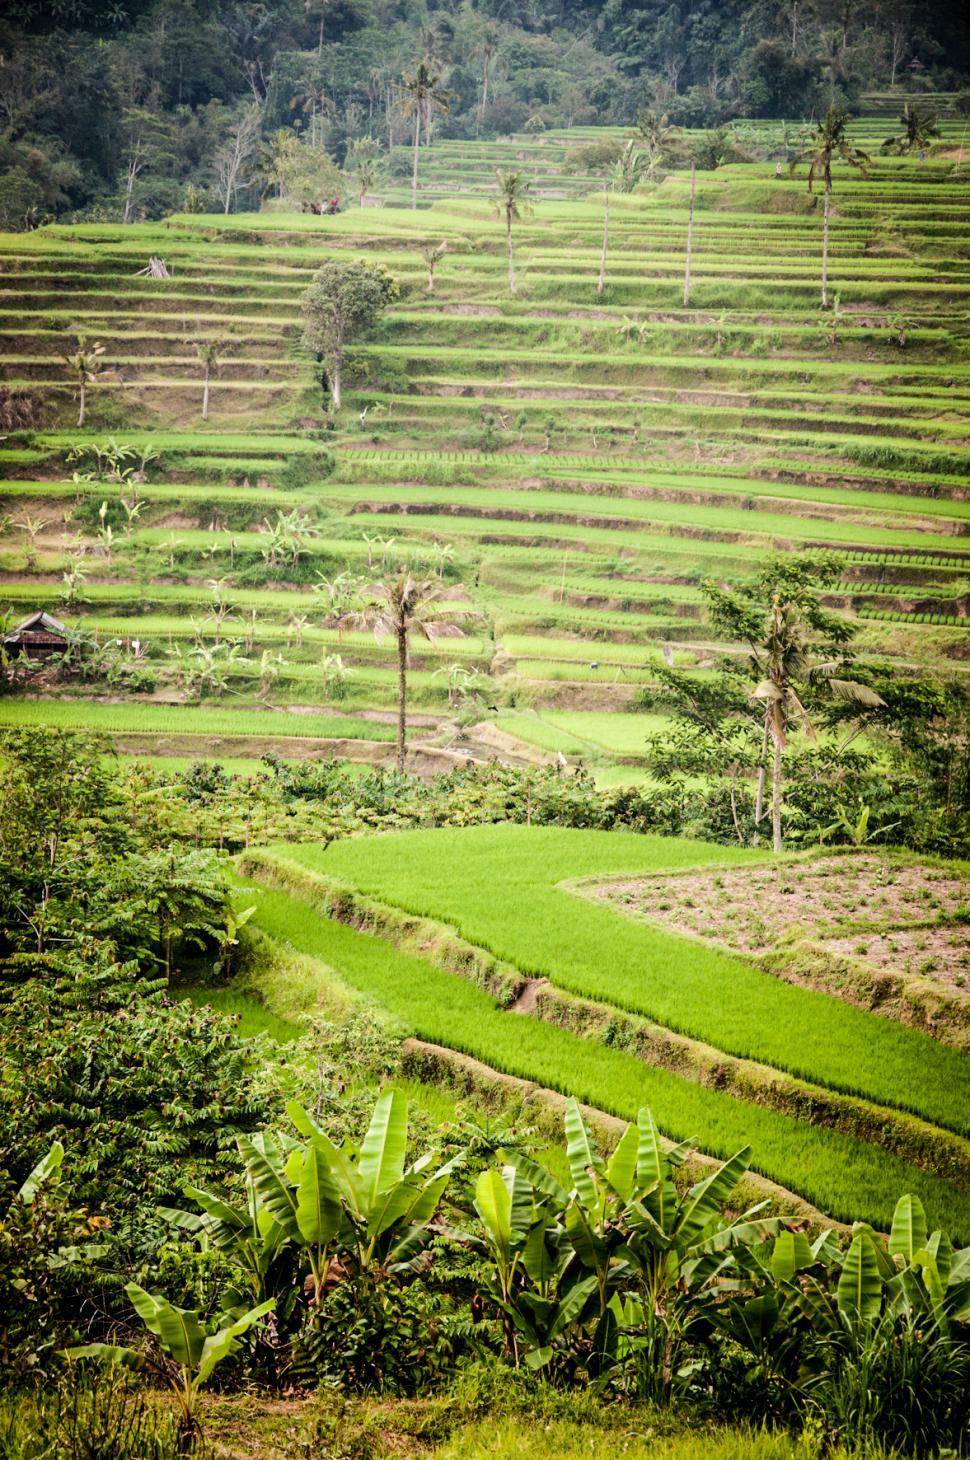 Free Image of Rice Fields in Bali Asia 